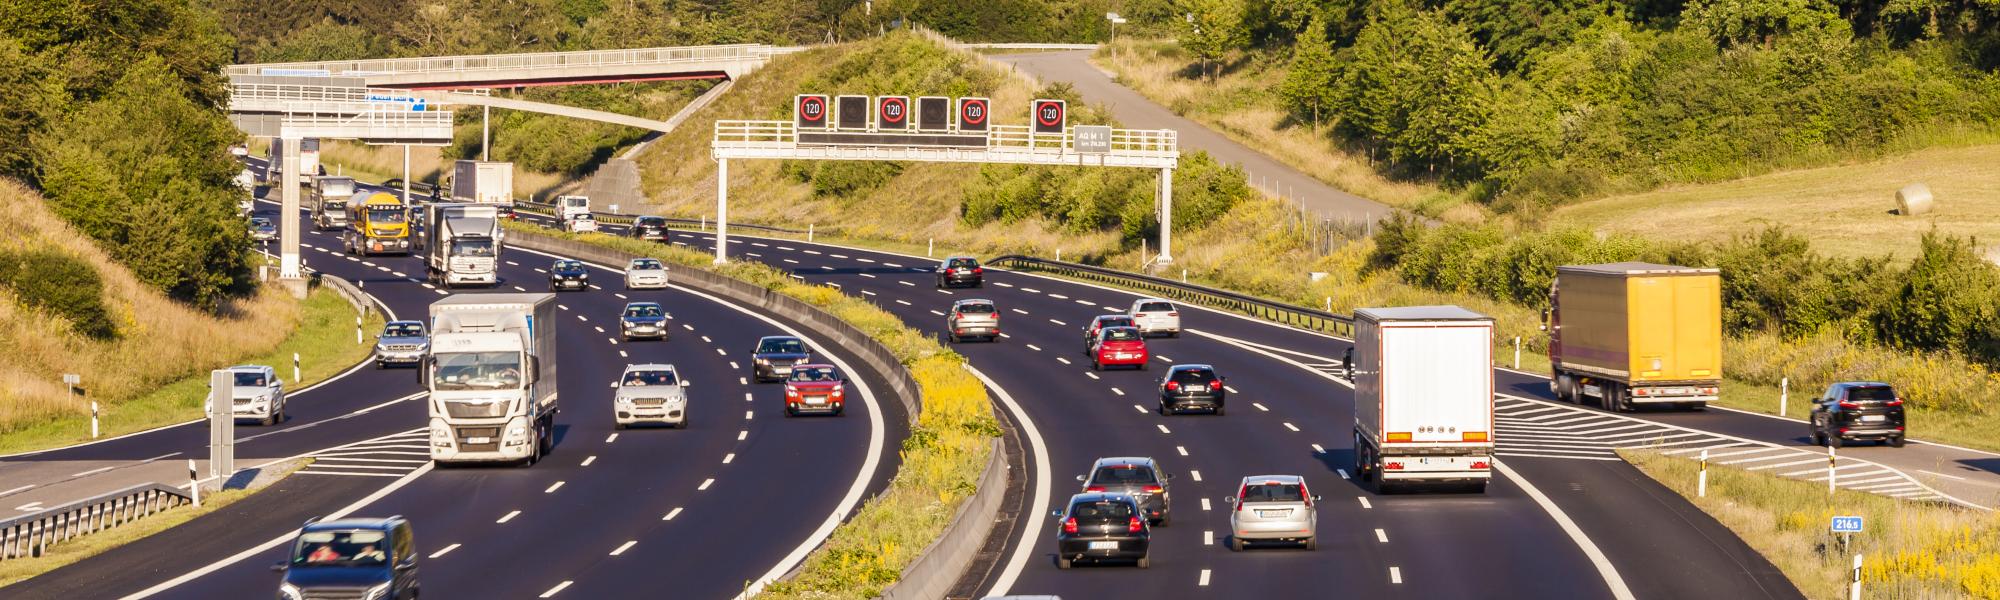 Can road transport absorb the doubling of EU toll rates at short notice?